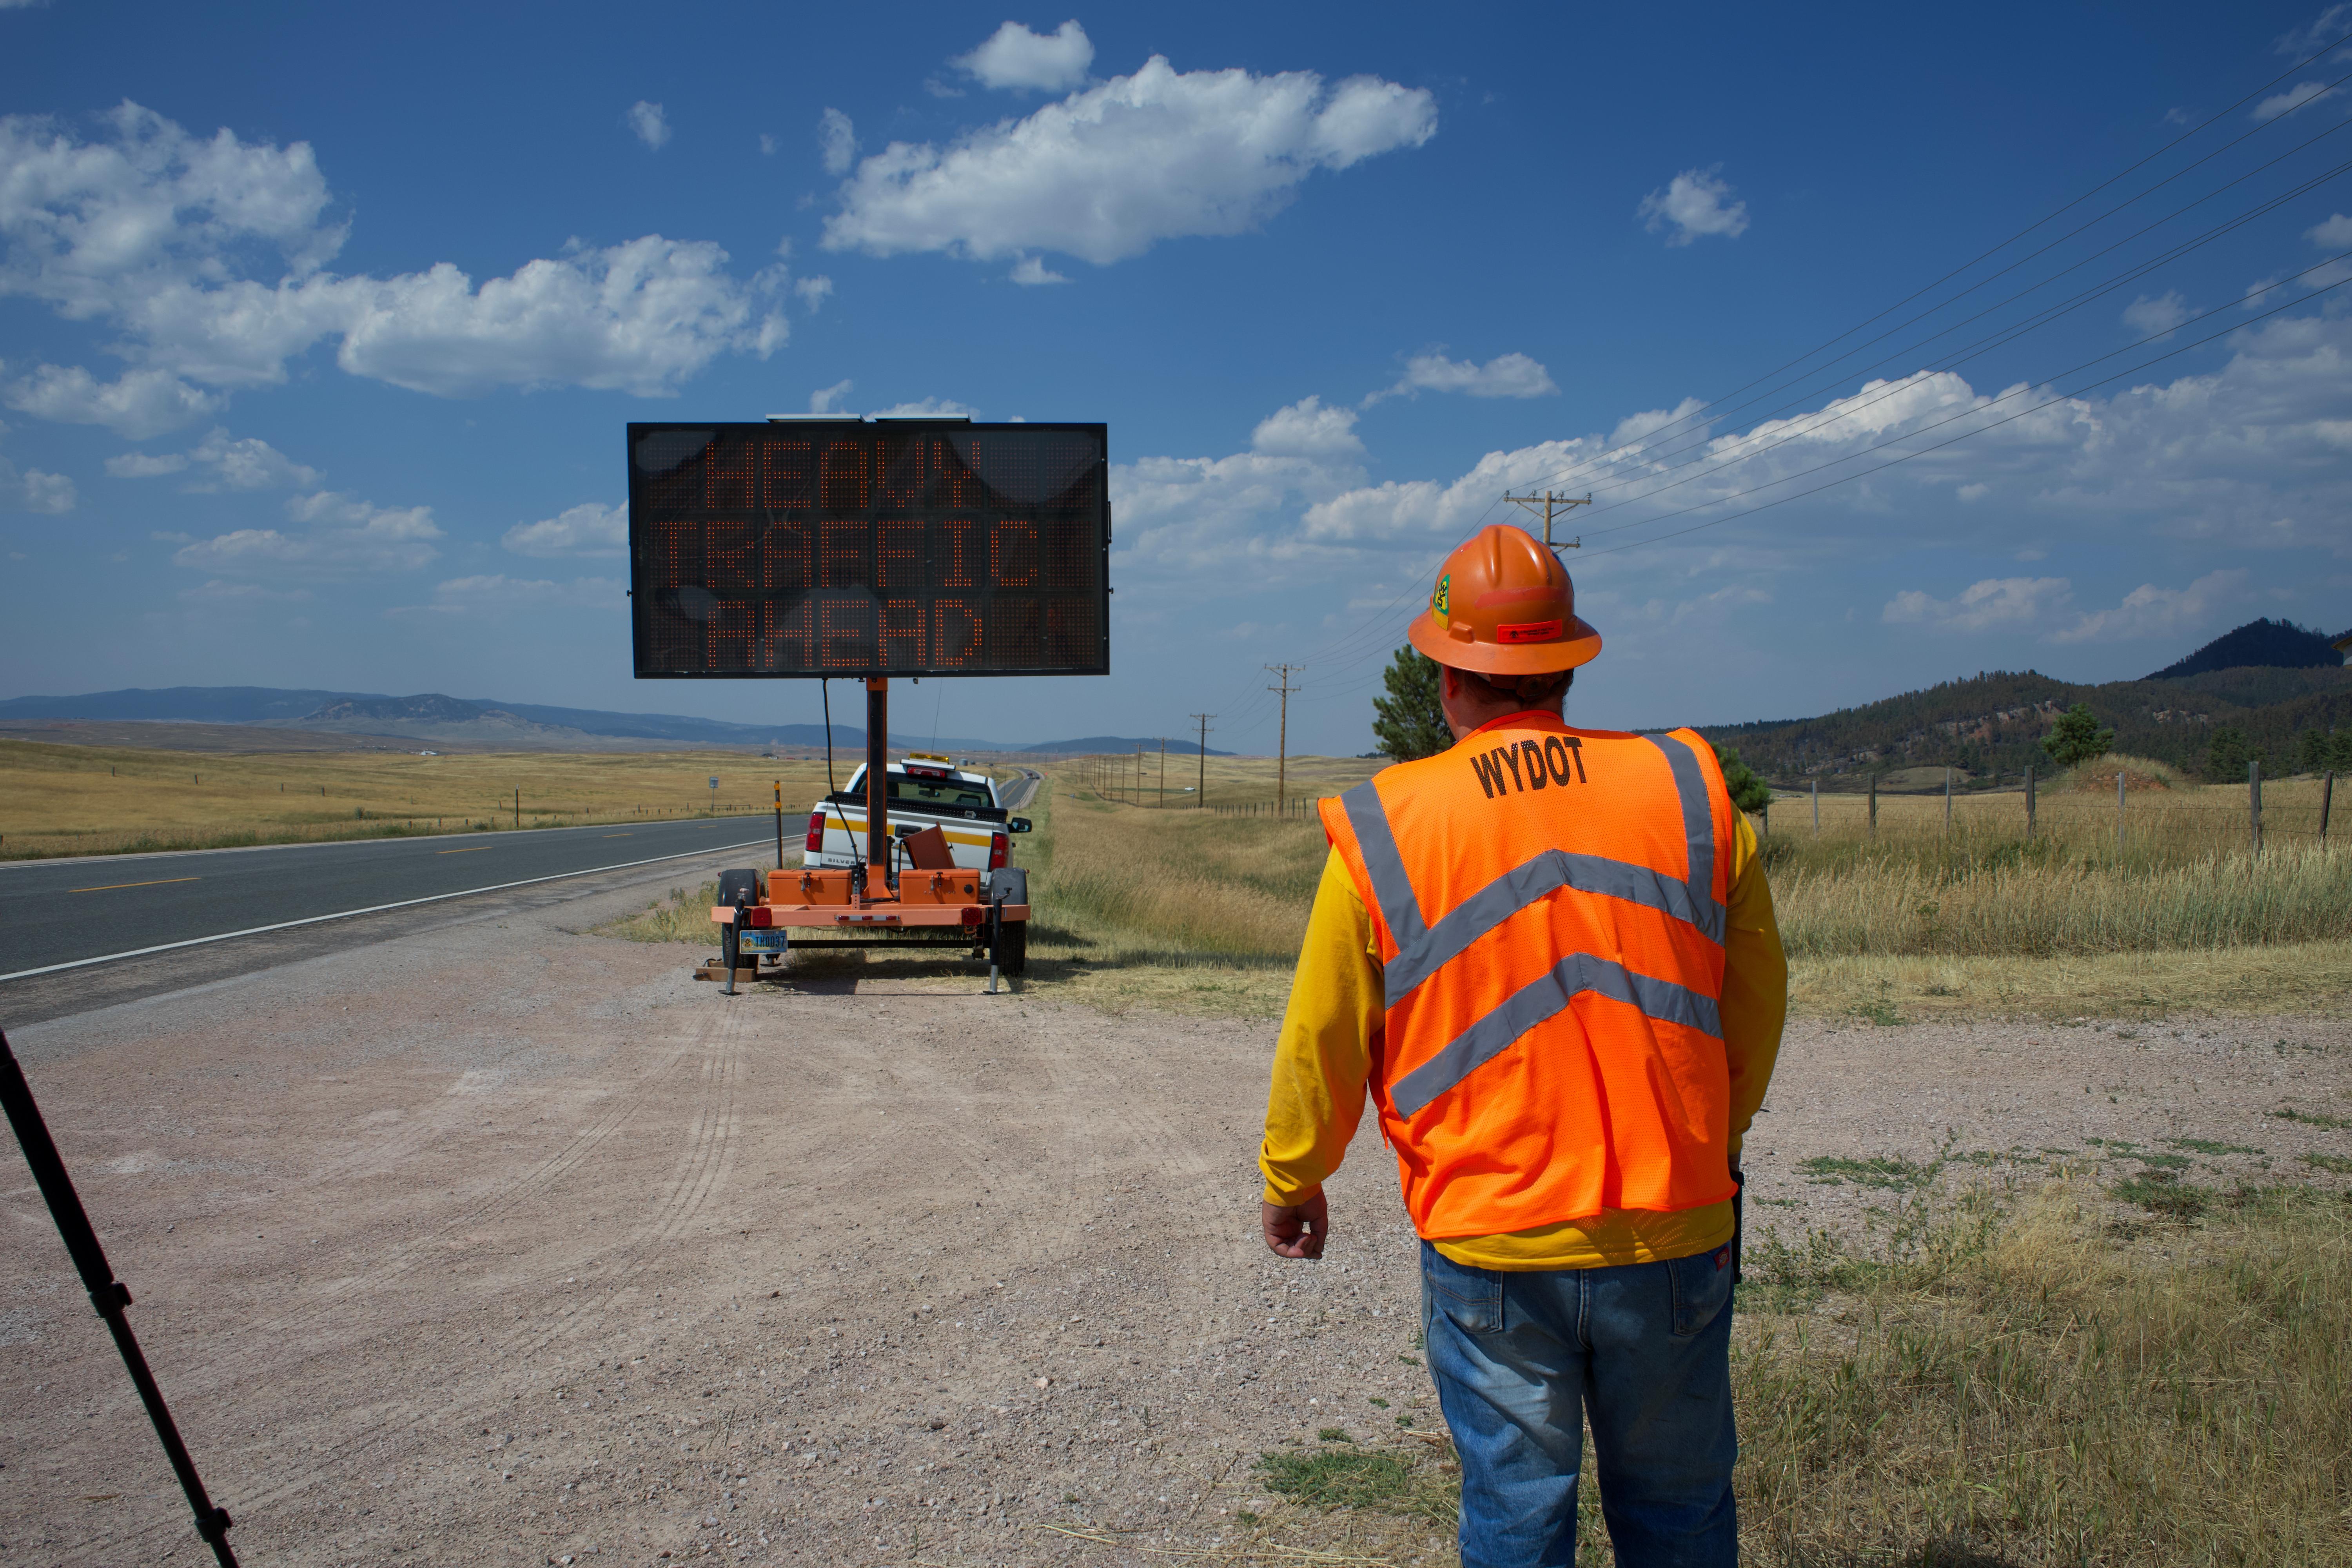 A highway worker installs a large electronic hazard warning sign on the side of the road to warn motorists of fire equipment along the road